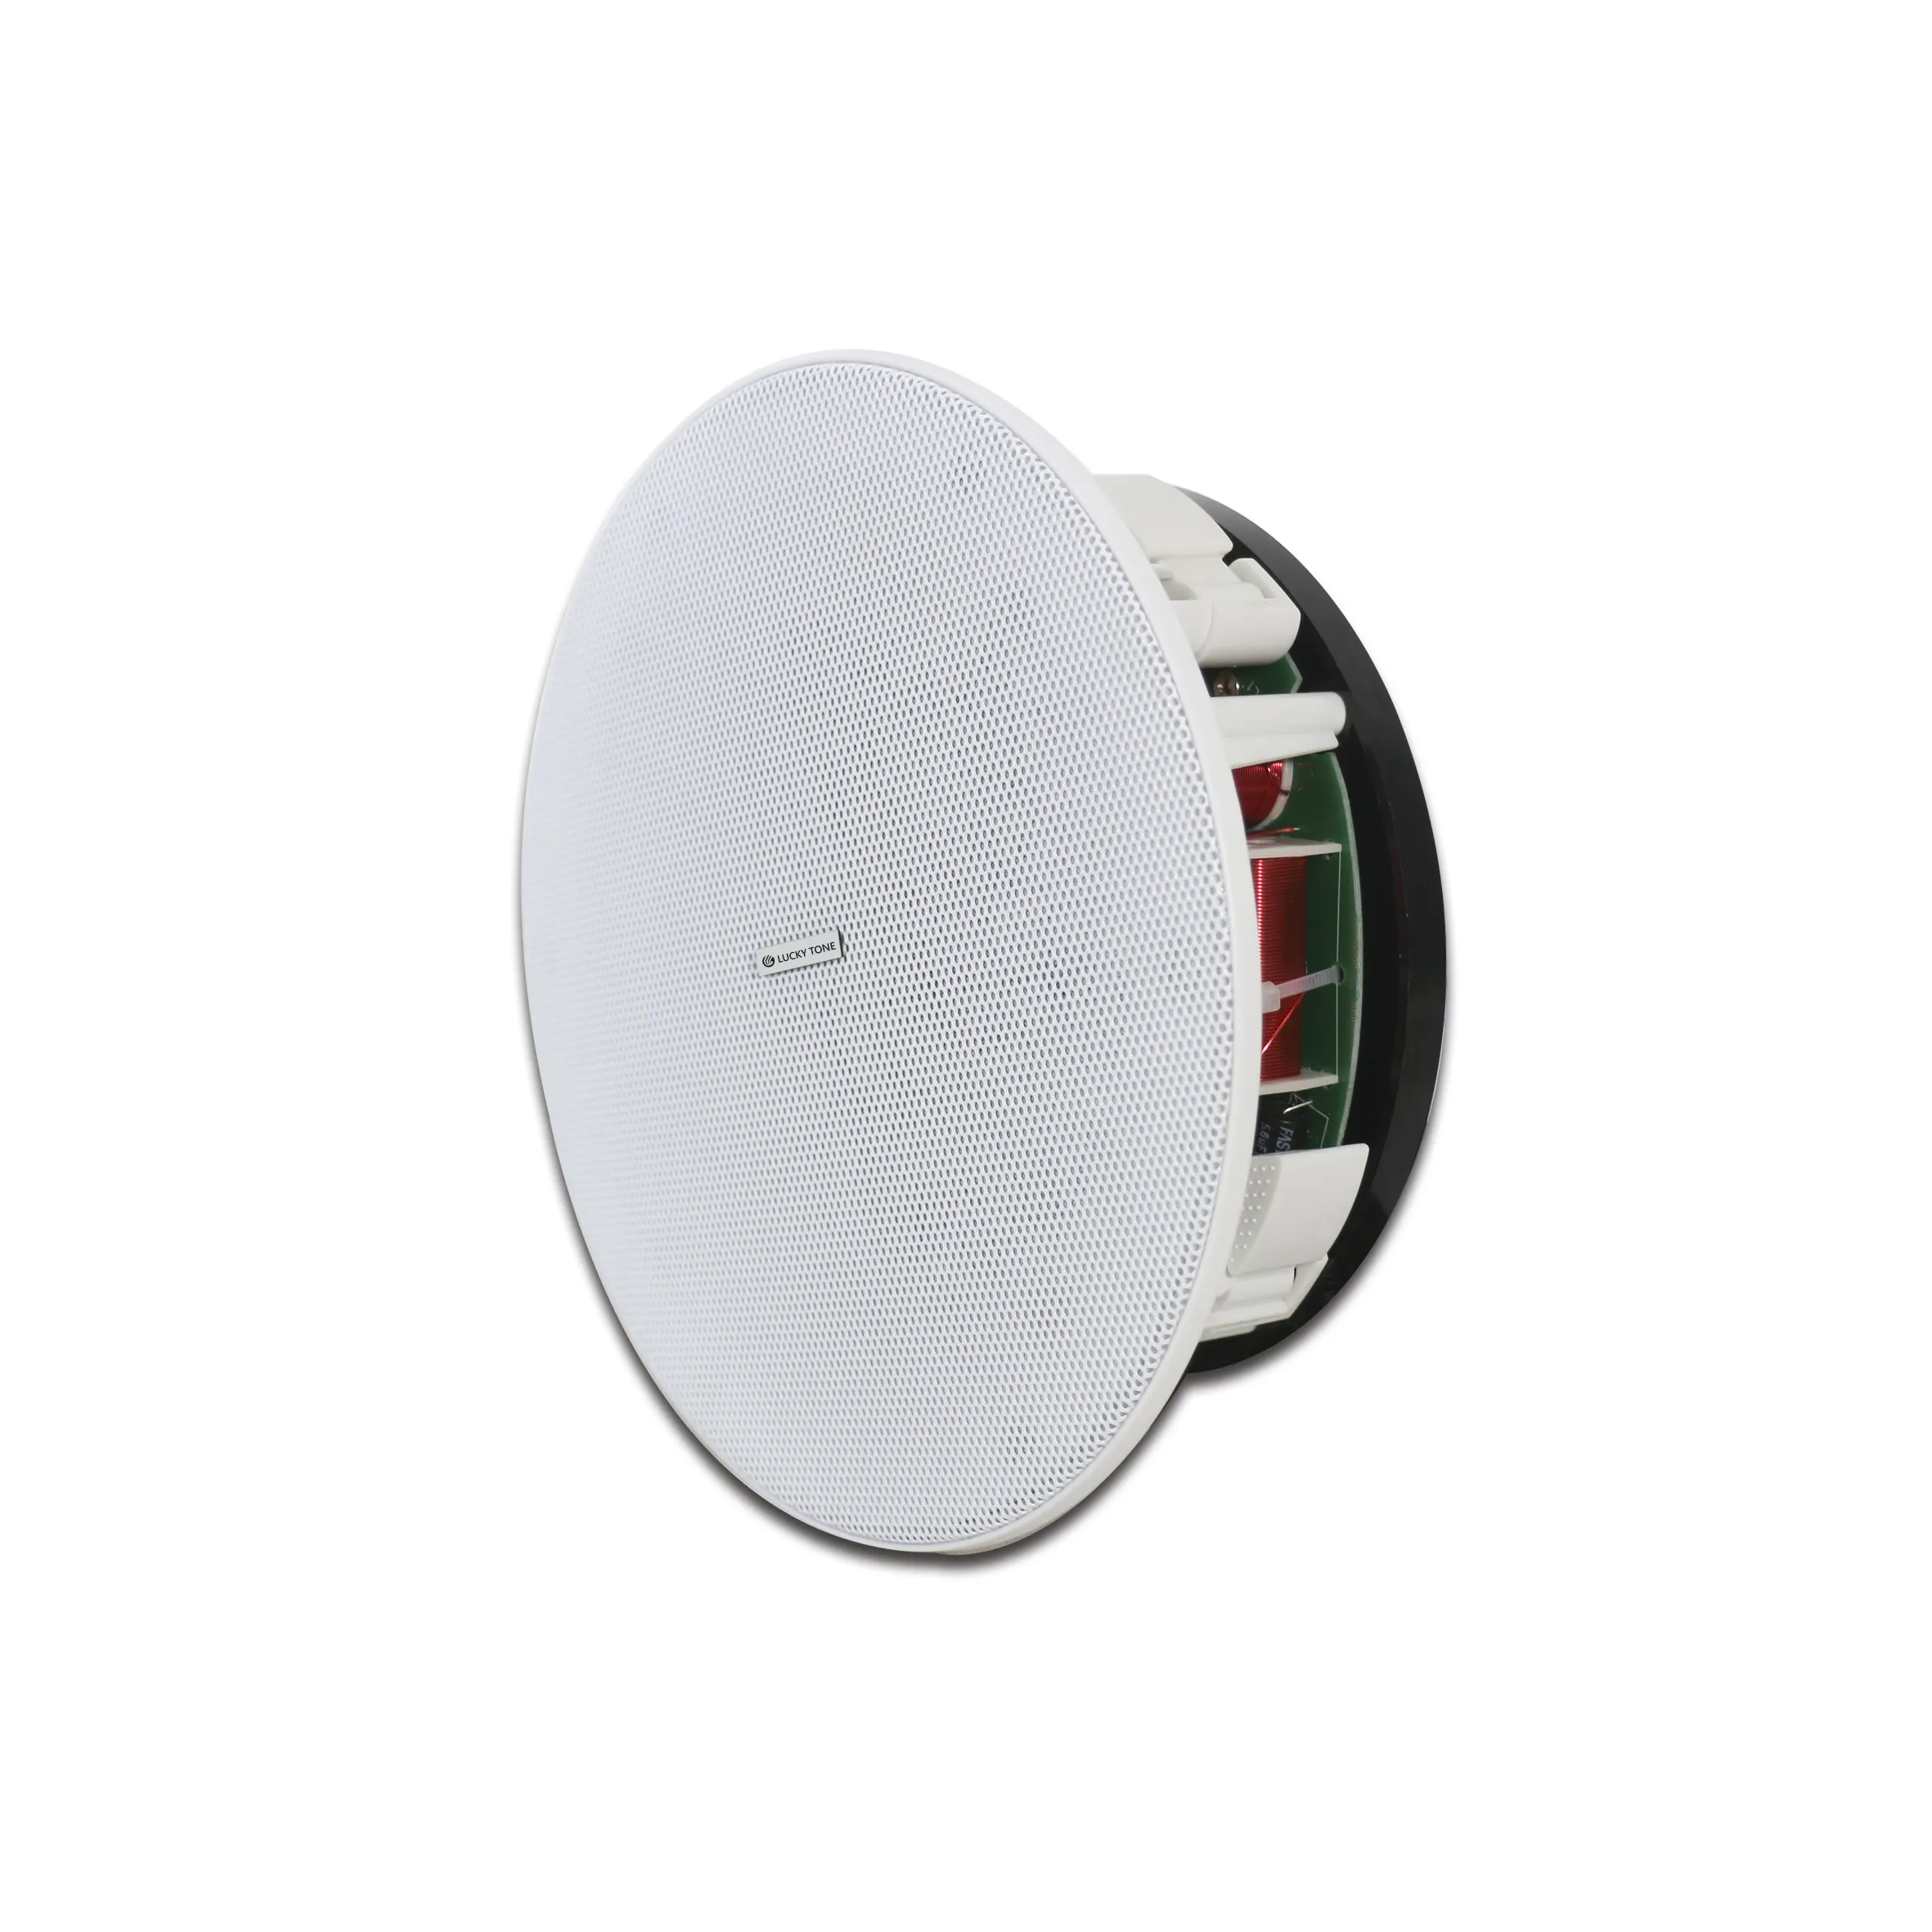 8 inch 80W rimless design ceiling speaker with kev-lar driver for PA system